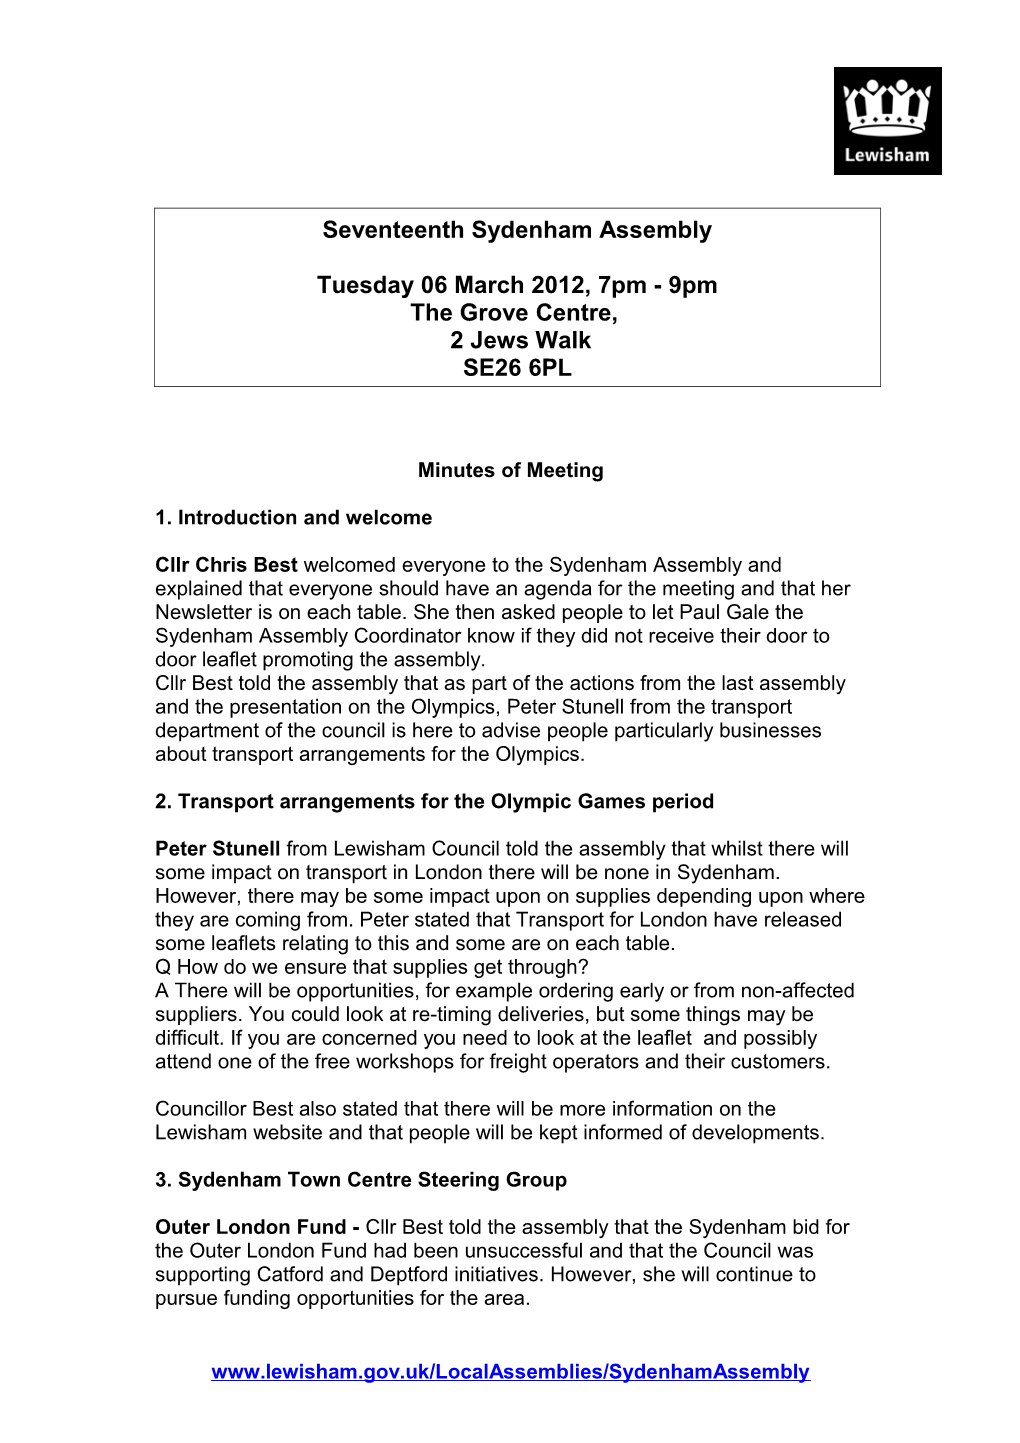 Sydenham Assembly Minutes Tuesday 06 March 2012